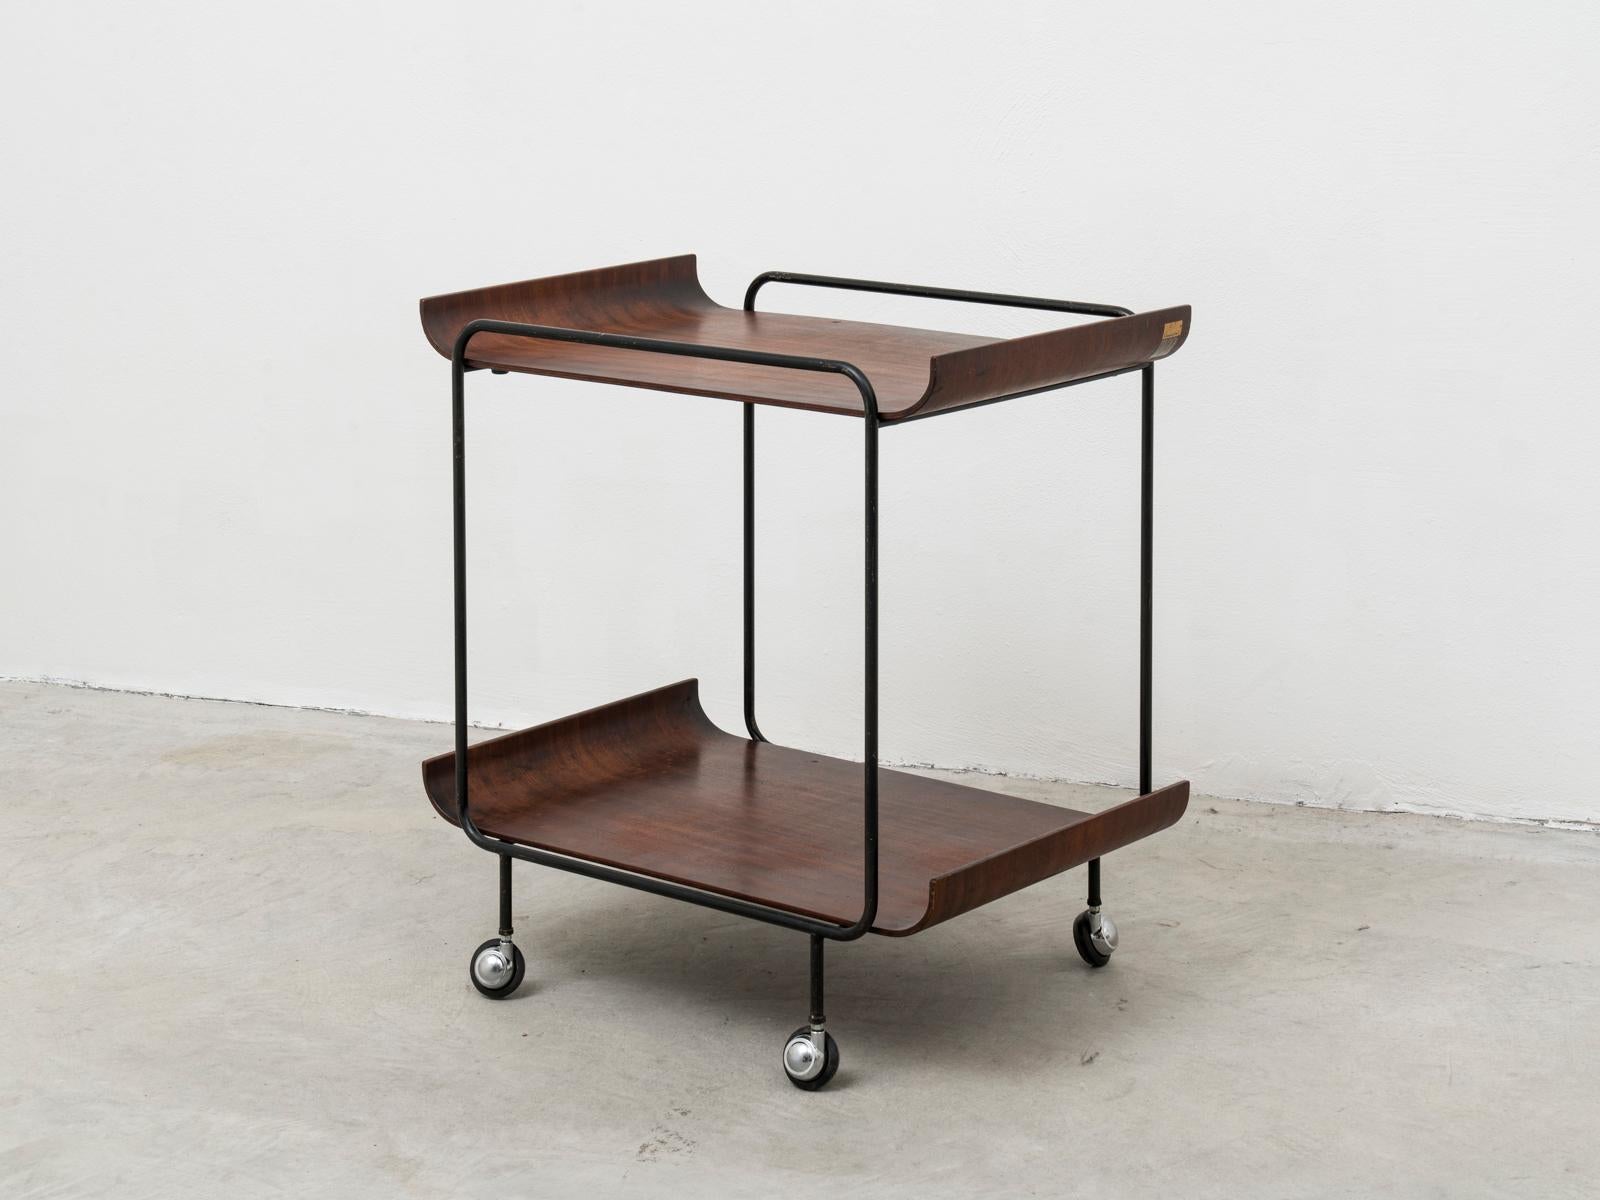 This serving trolley was manufactured in Italy by Creazioni Stilcasa in the late 1960s.
It has a black-varnished iron structure in which two removable bentwood trays with rosewood veneer are set in place.
Both trays are labeled 